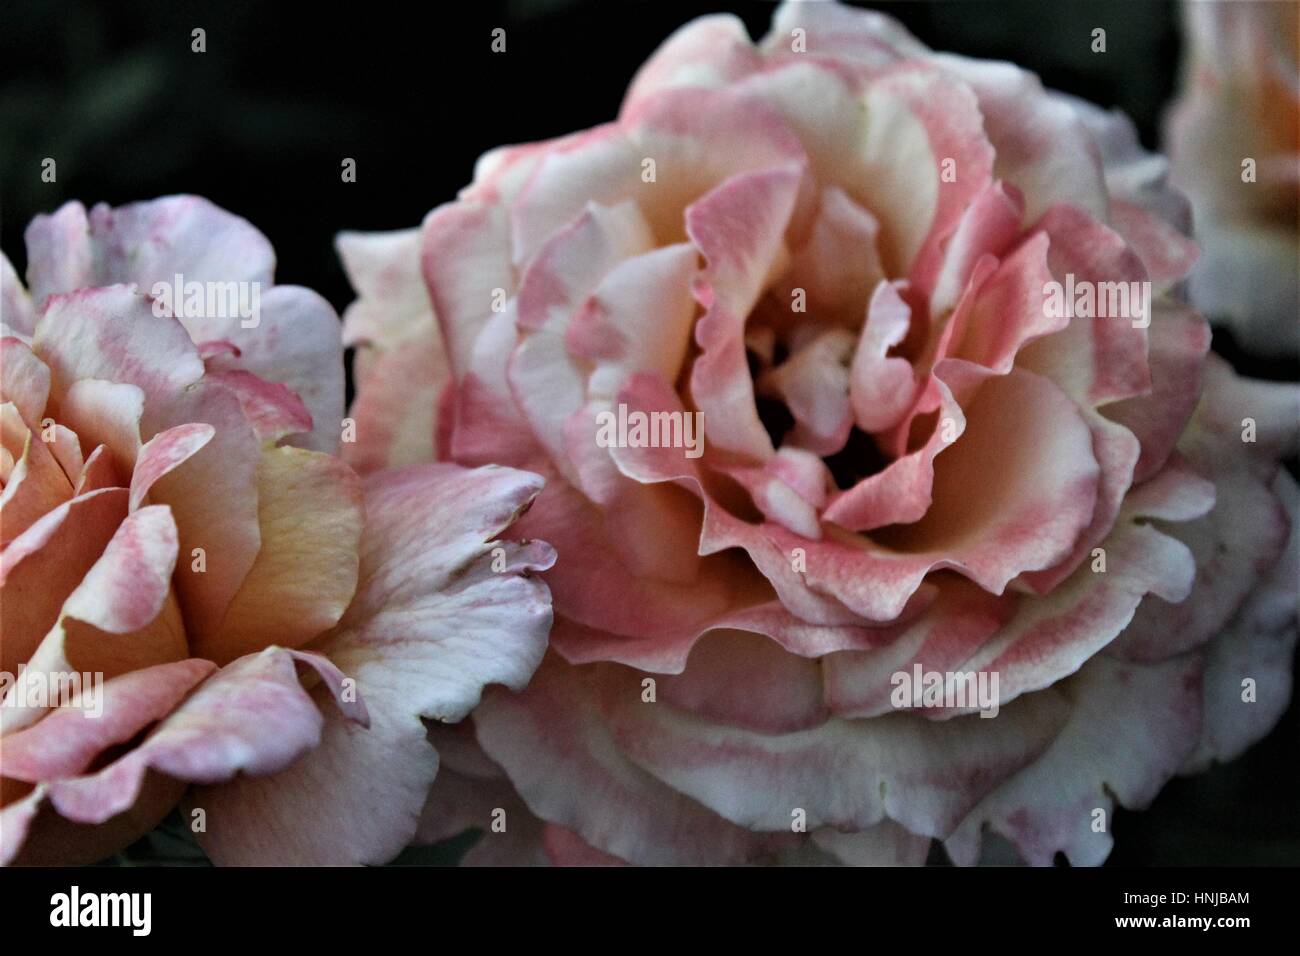 two blooming pink roses Stock Photo